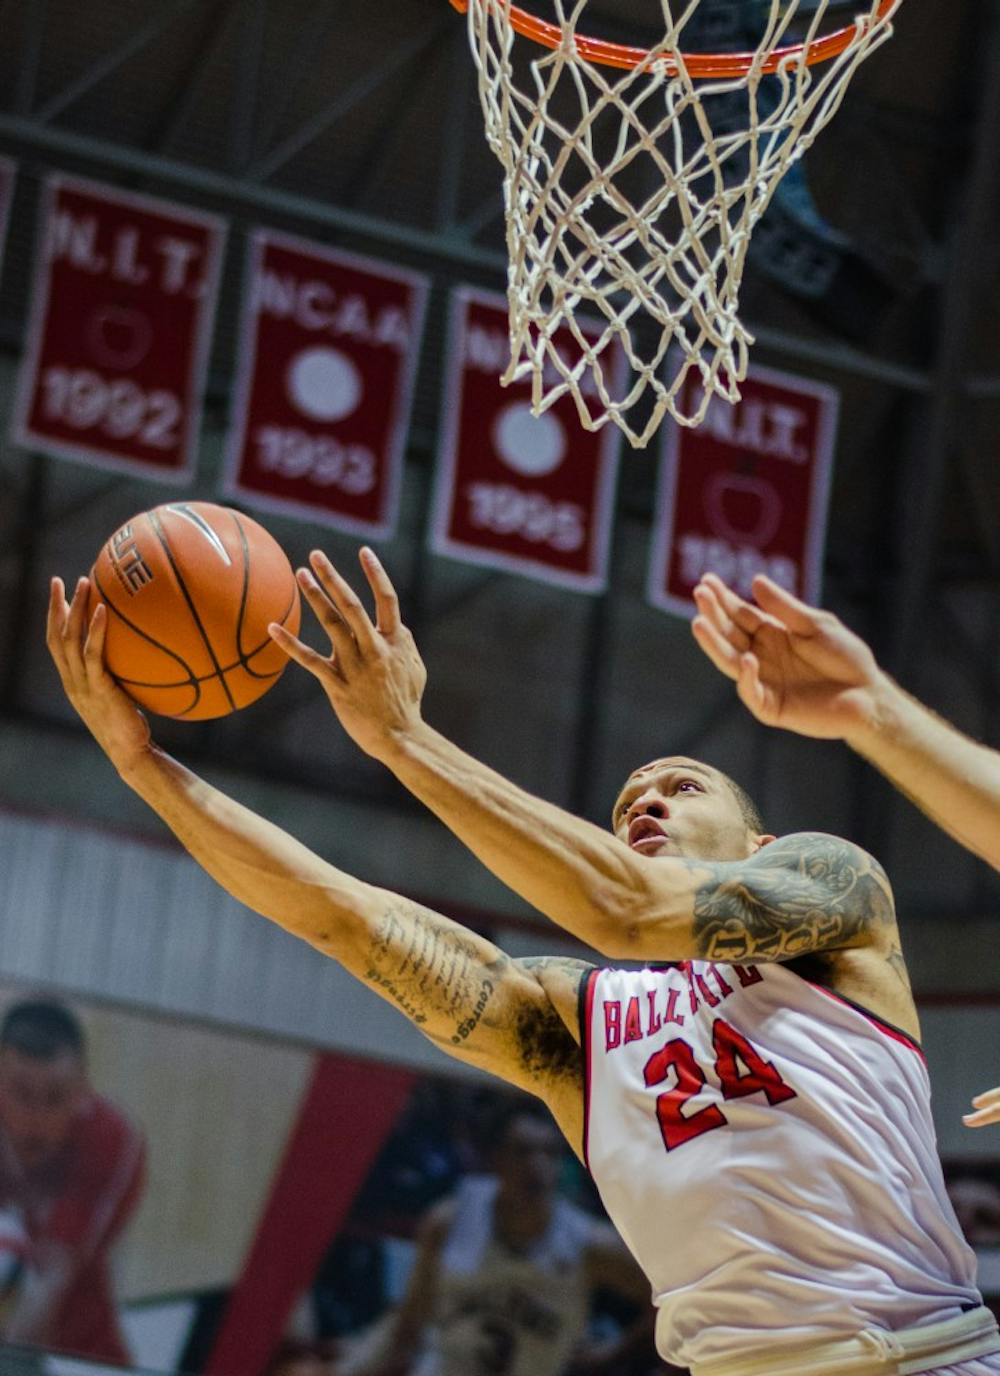 Senior guard Jeremiah Davis started most of last season, however he has been developing a different role to provide better scoring and defense. The Ball State men's basketball team is 10-5 in their season and 1-1 in Mid-American Conference play. DN PHOTO BREANNA DAUGHERTY